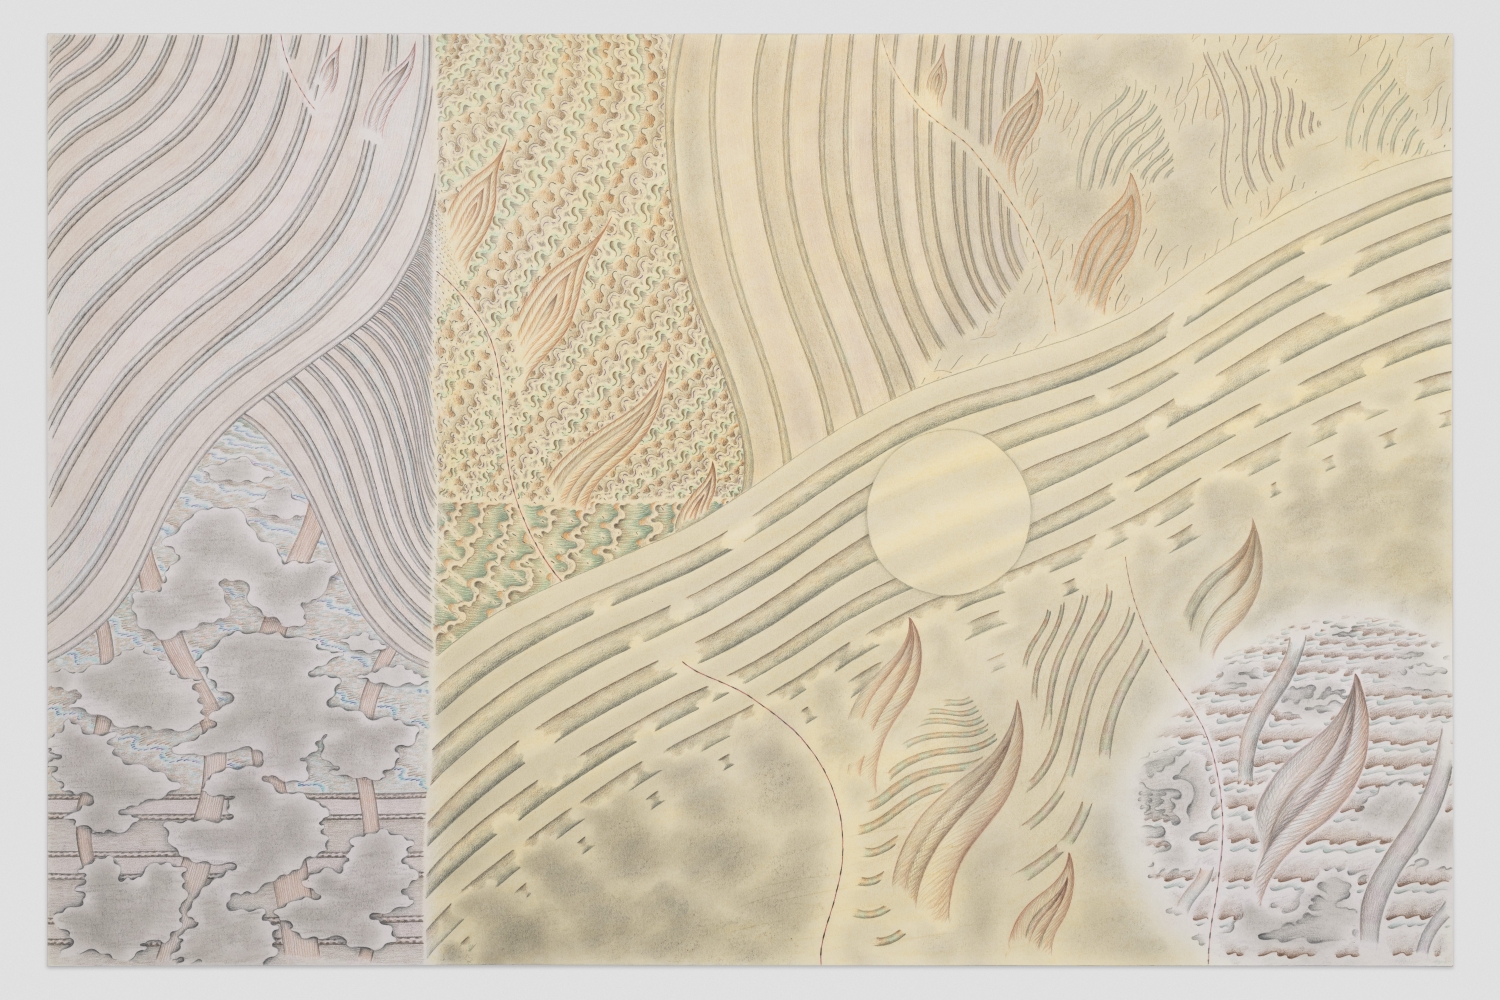 Tidal Phases,&nbsp;1984 Graphite, pastel and colored pencil on paper